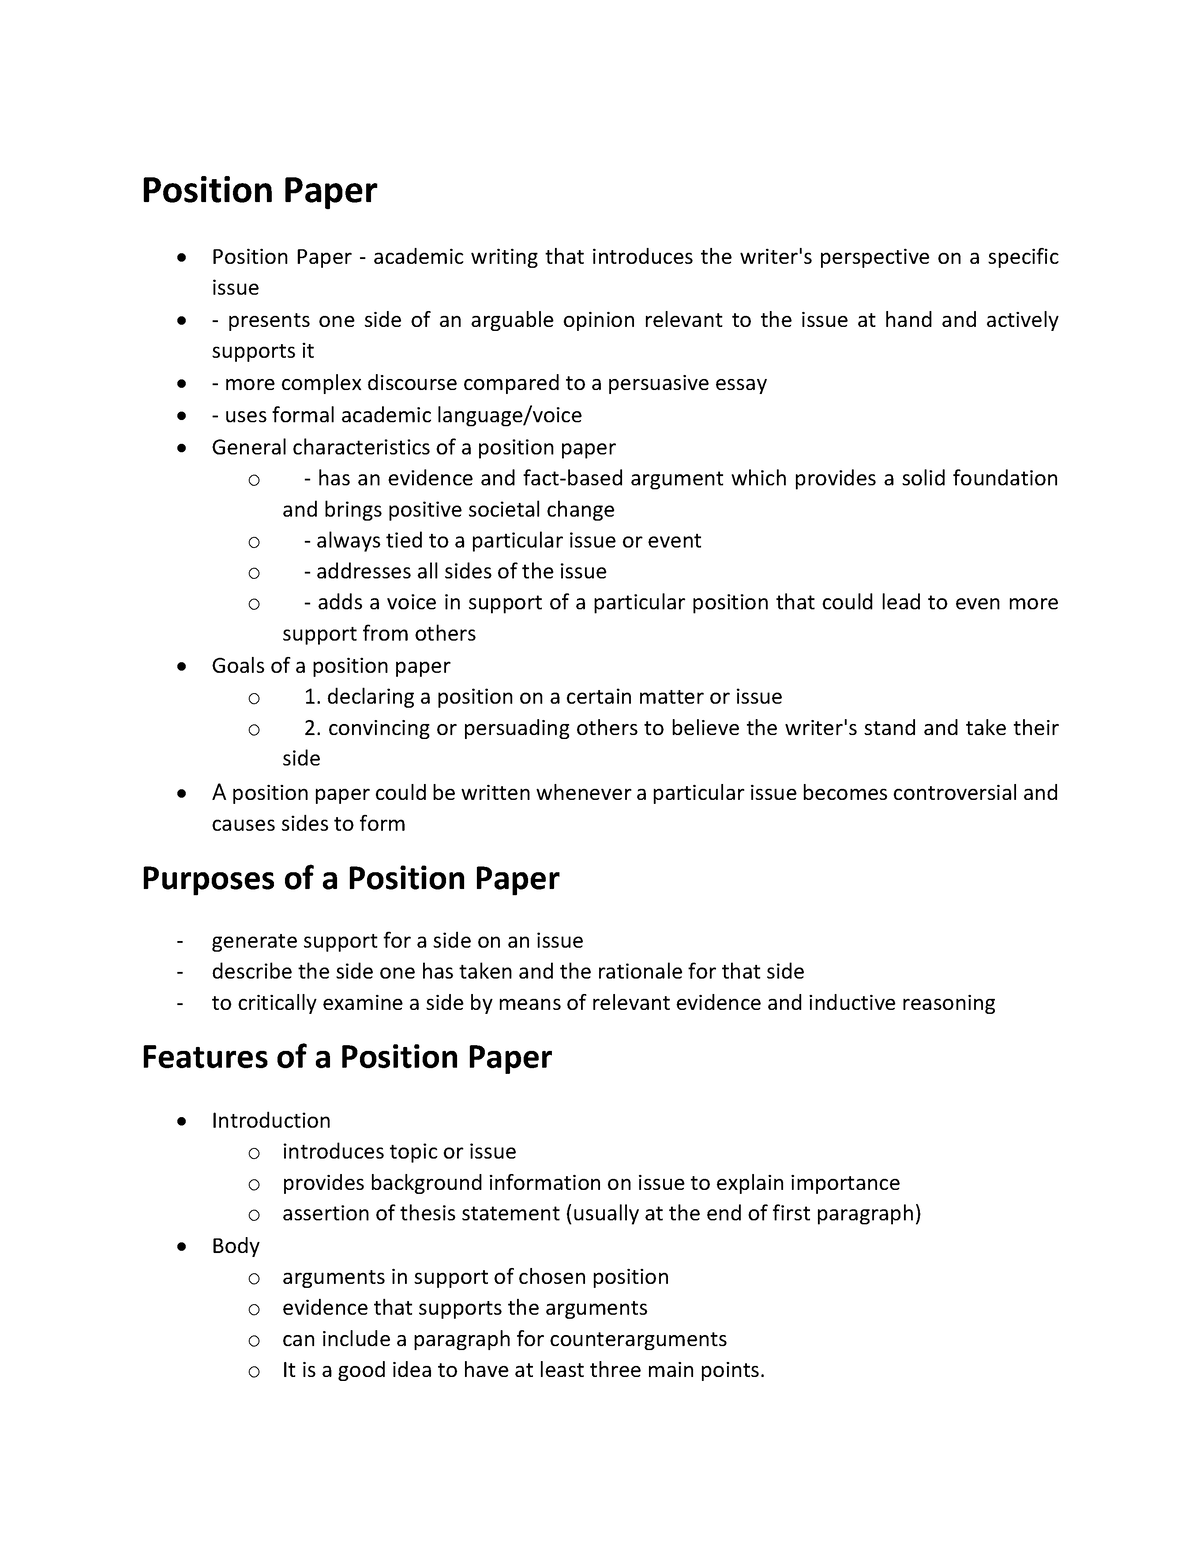 researched position paper